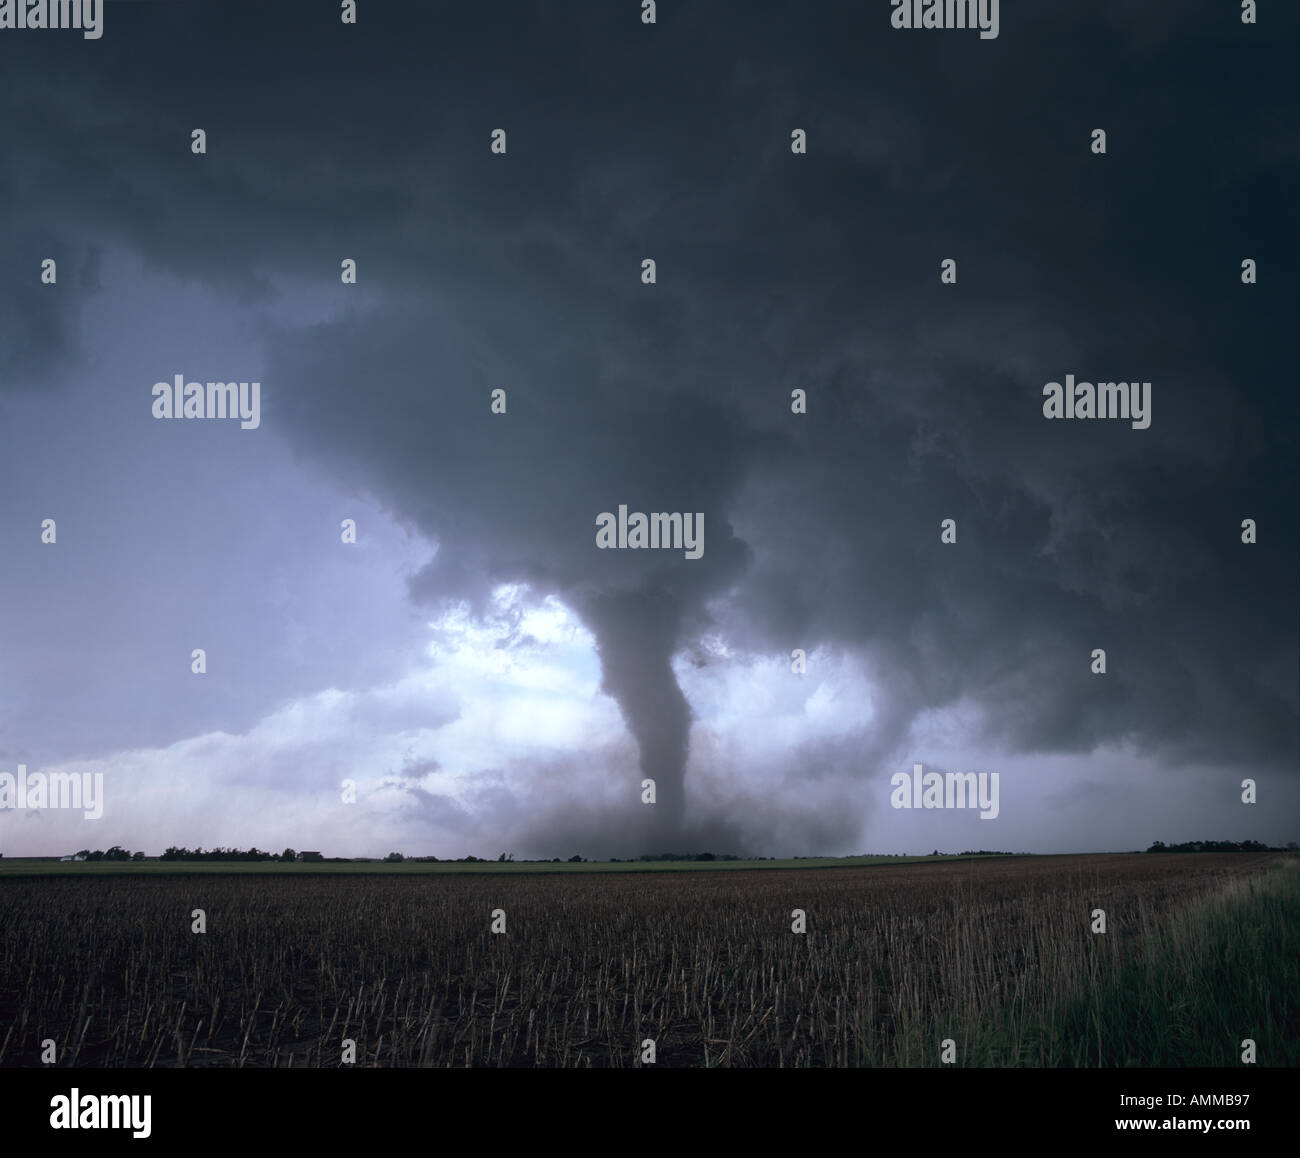 A tornado touches down from a supercell thunderstorm in farmland in Nebraska, USA Stock Photo